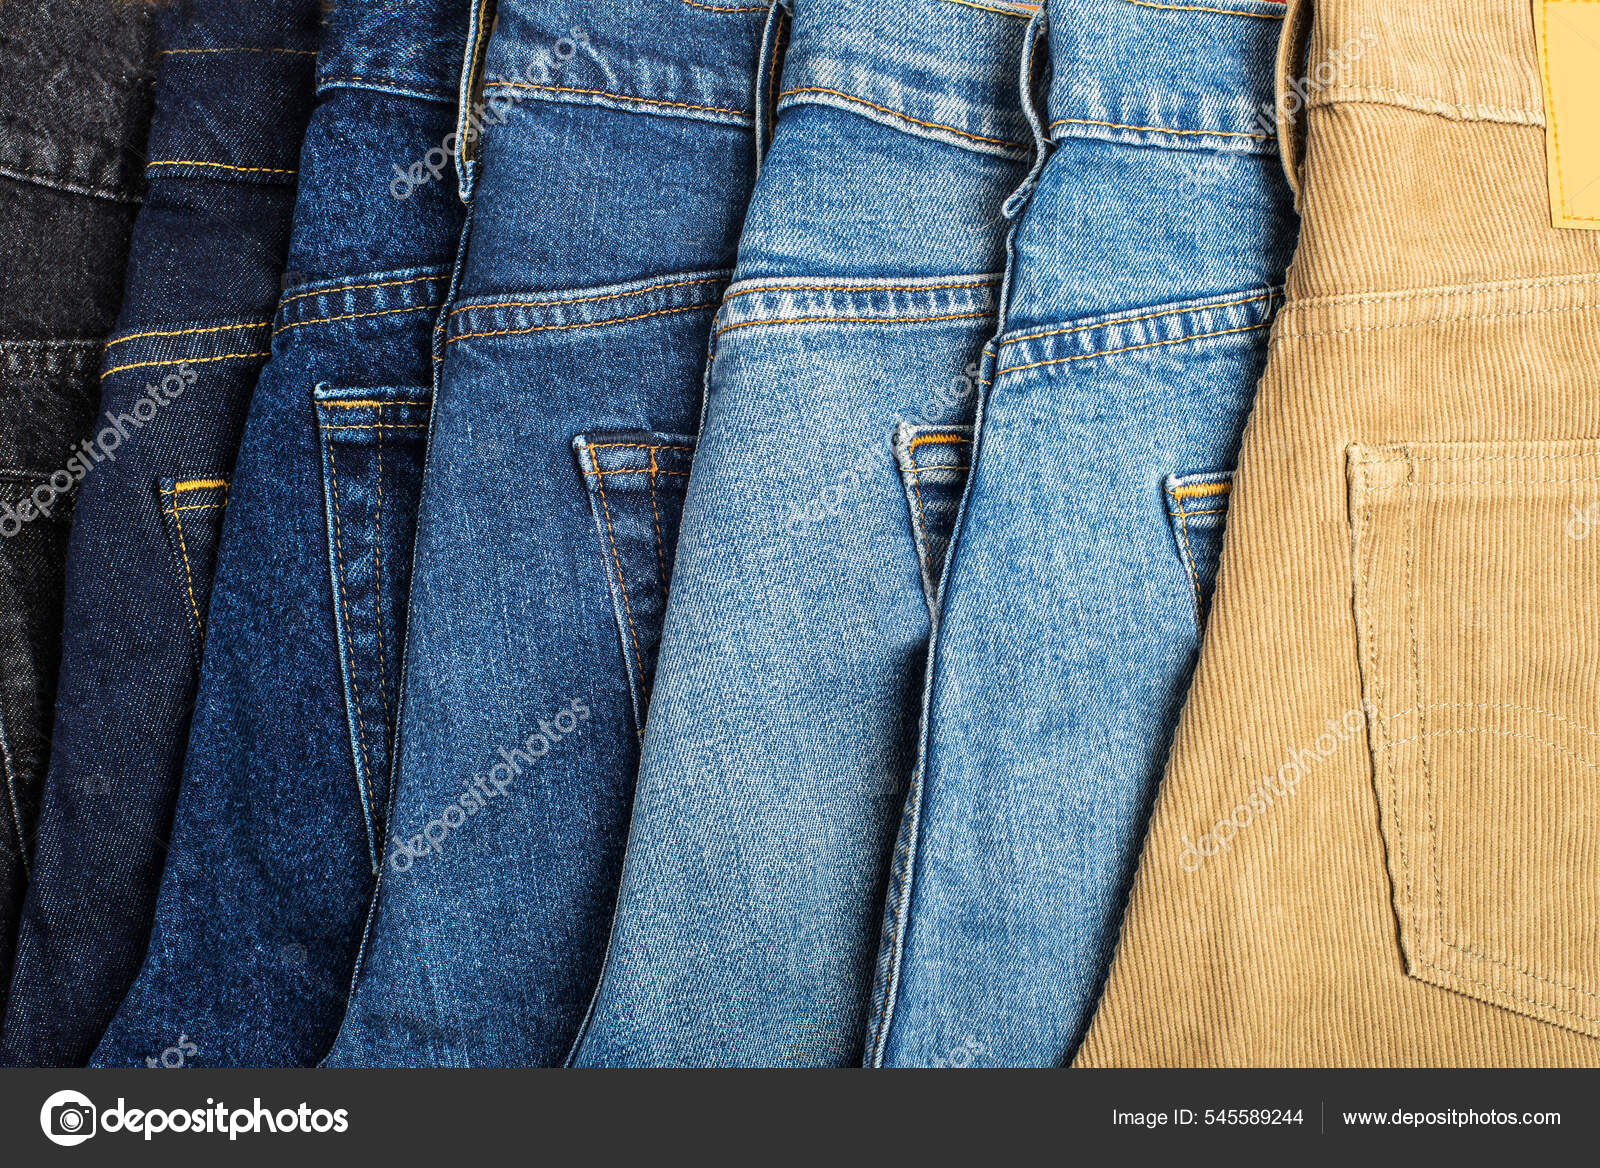 Jeans Are Dark Blue And Light Blue Color On A White Background. Denim  Texture. Flat Lay, Top View. Stock Photo, Picture and Royalty Free Image.  Image 139127296.